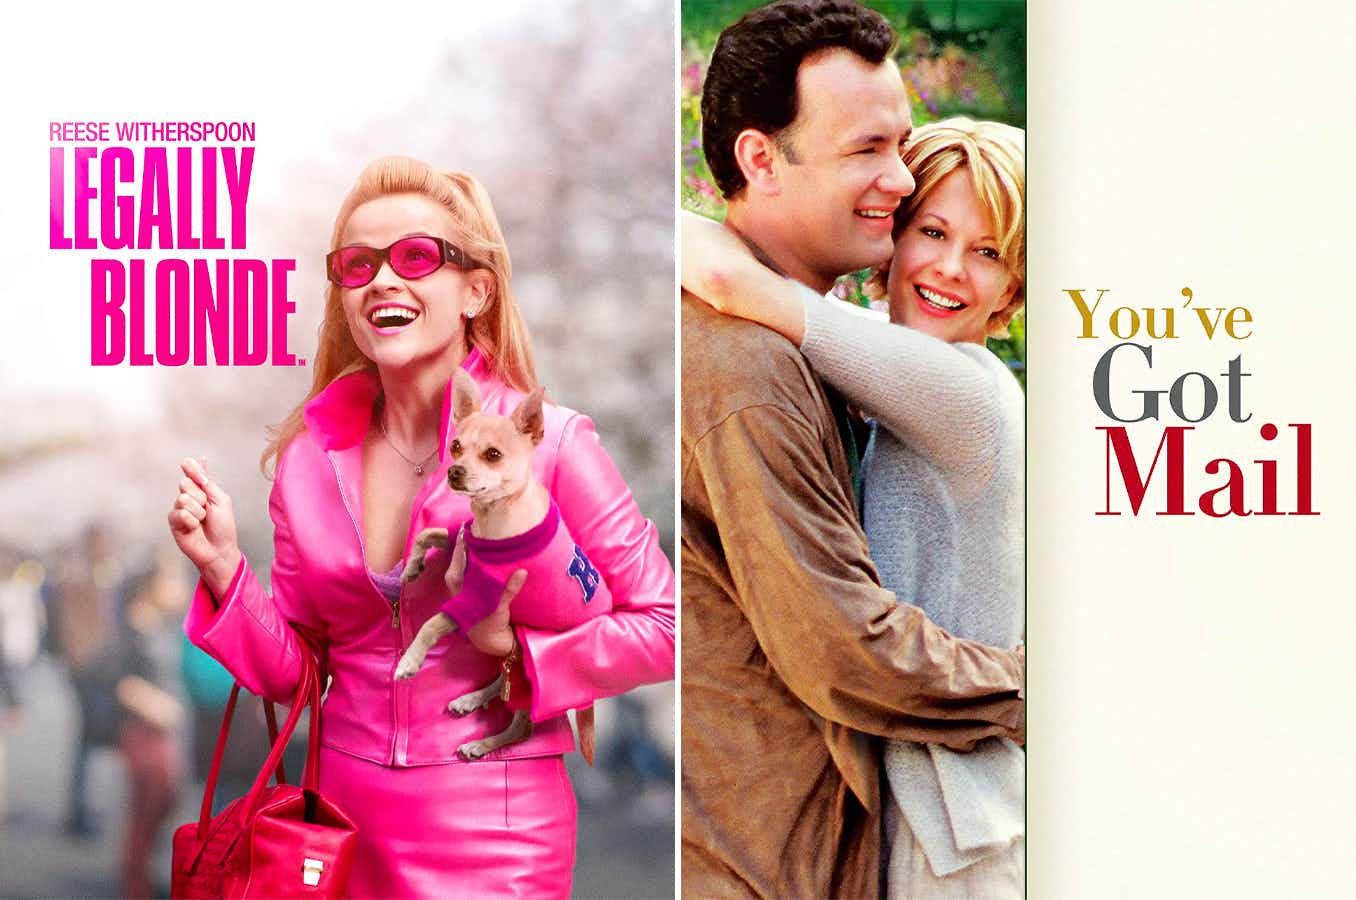 The covers for Legally Blonde and You've Got Mail next to each other.